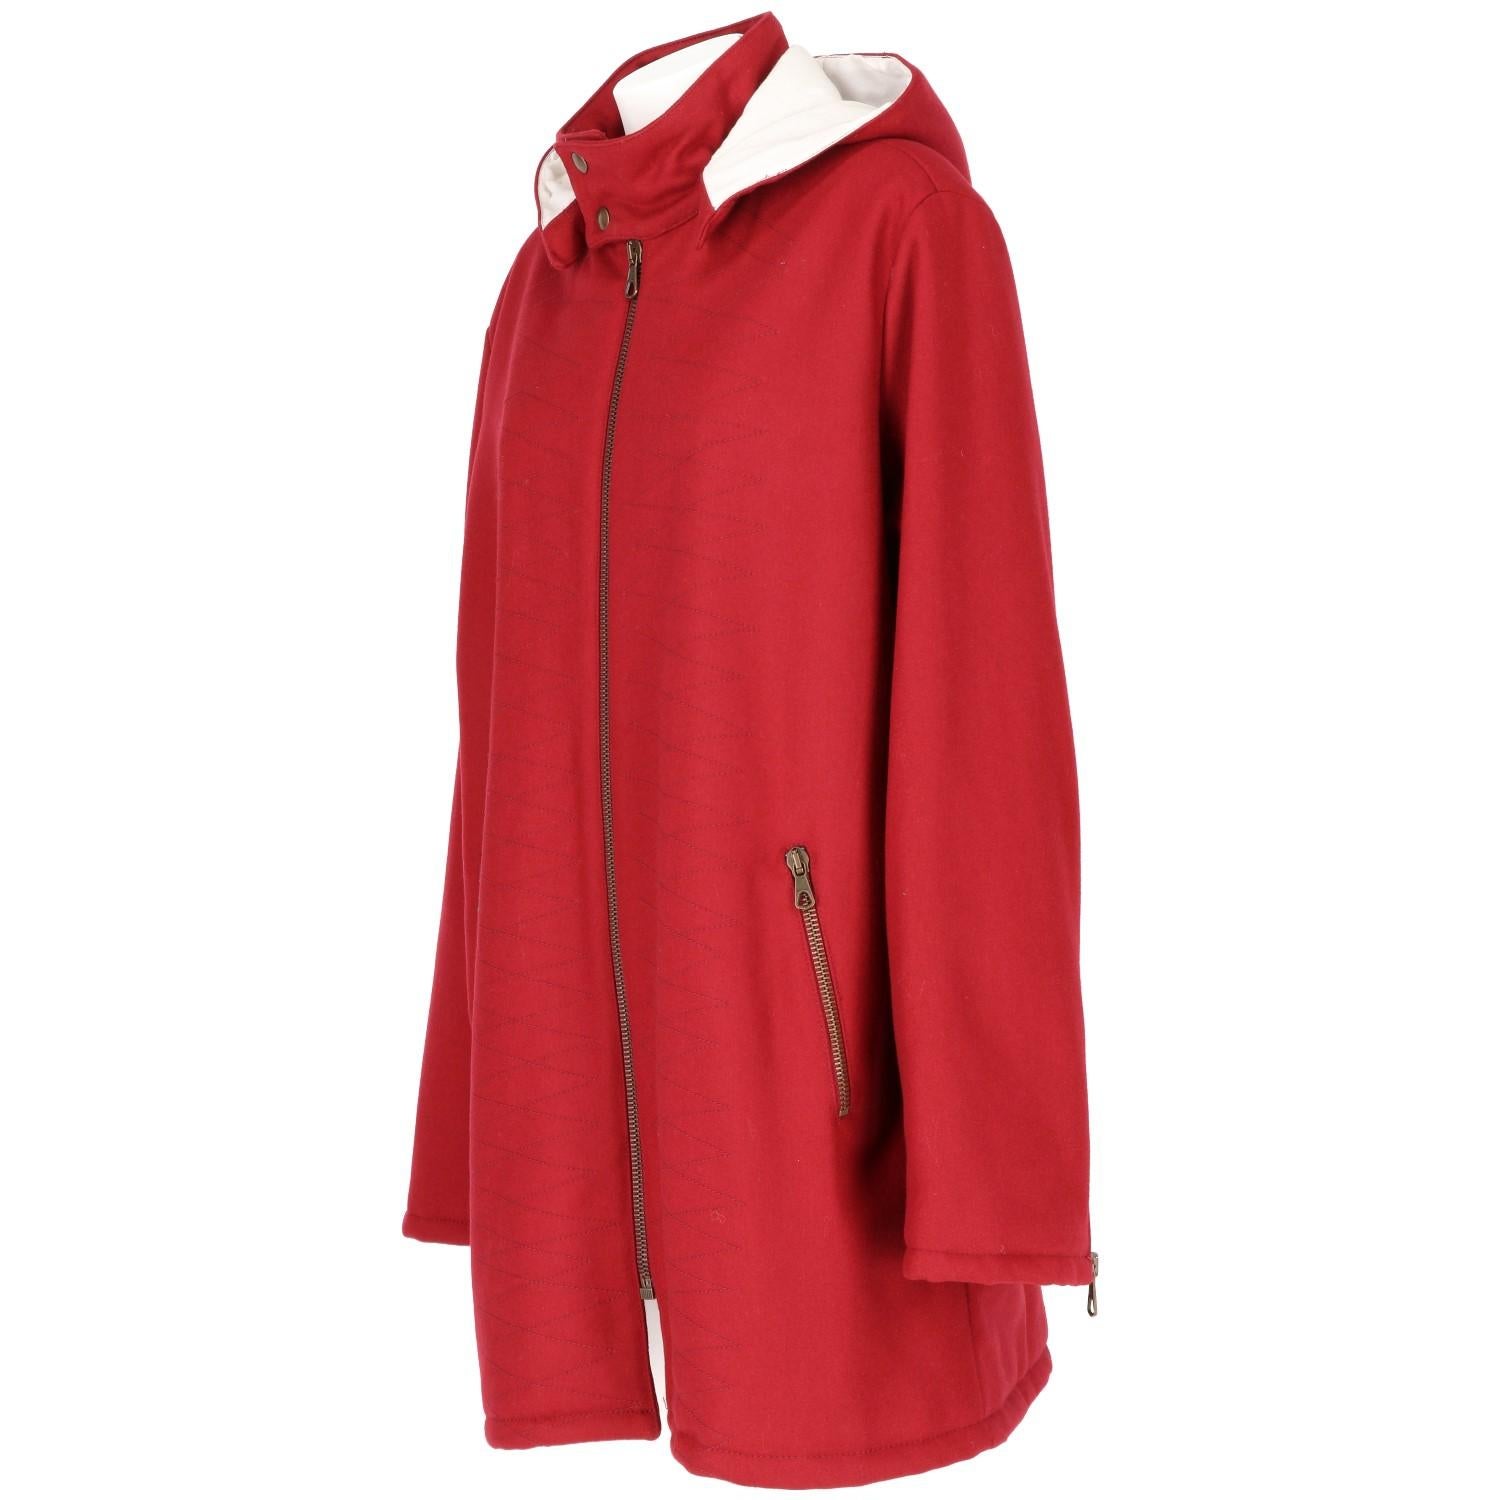 Romeo Gigli cool burgundy cotton and wool blend stitch detail hooded coat. It features a press stud fastening, a front zip fastening, side zipped pockets, dropped shoulders, long sleeves, zip cuffs, a straight hem and a full lining. The item is